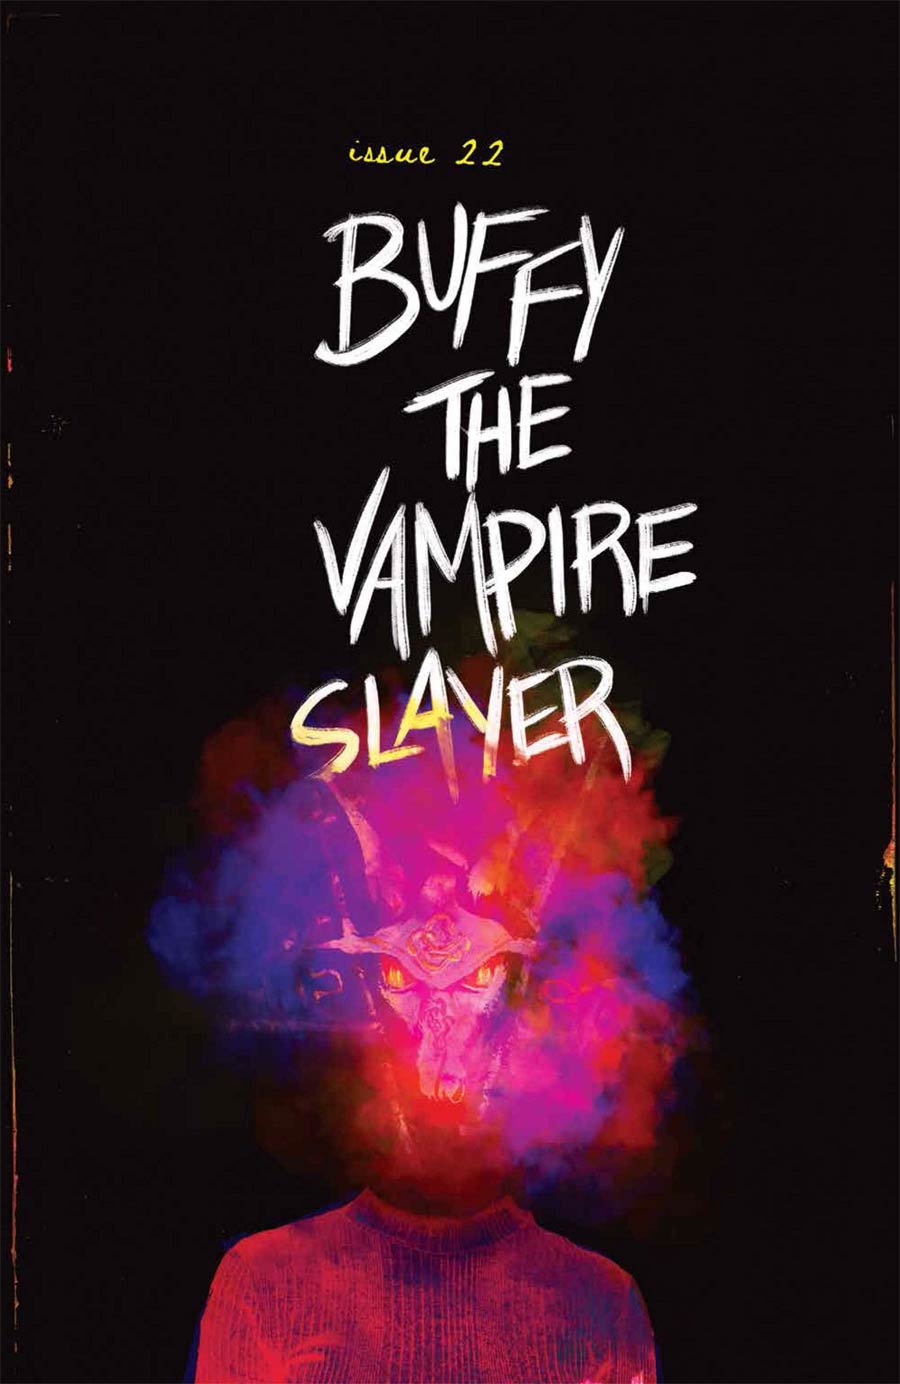 Buffy The Vampire Slayer Vol 2 #22 Cover C Variant Becca Carey Ring Of Fire Cover